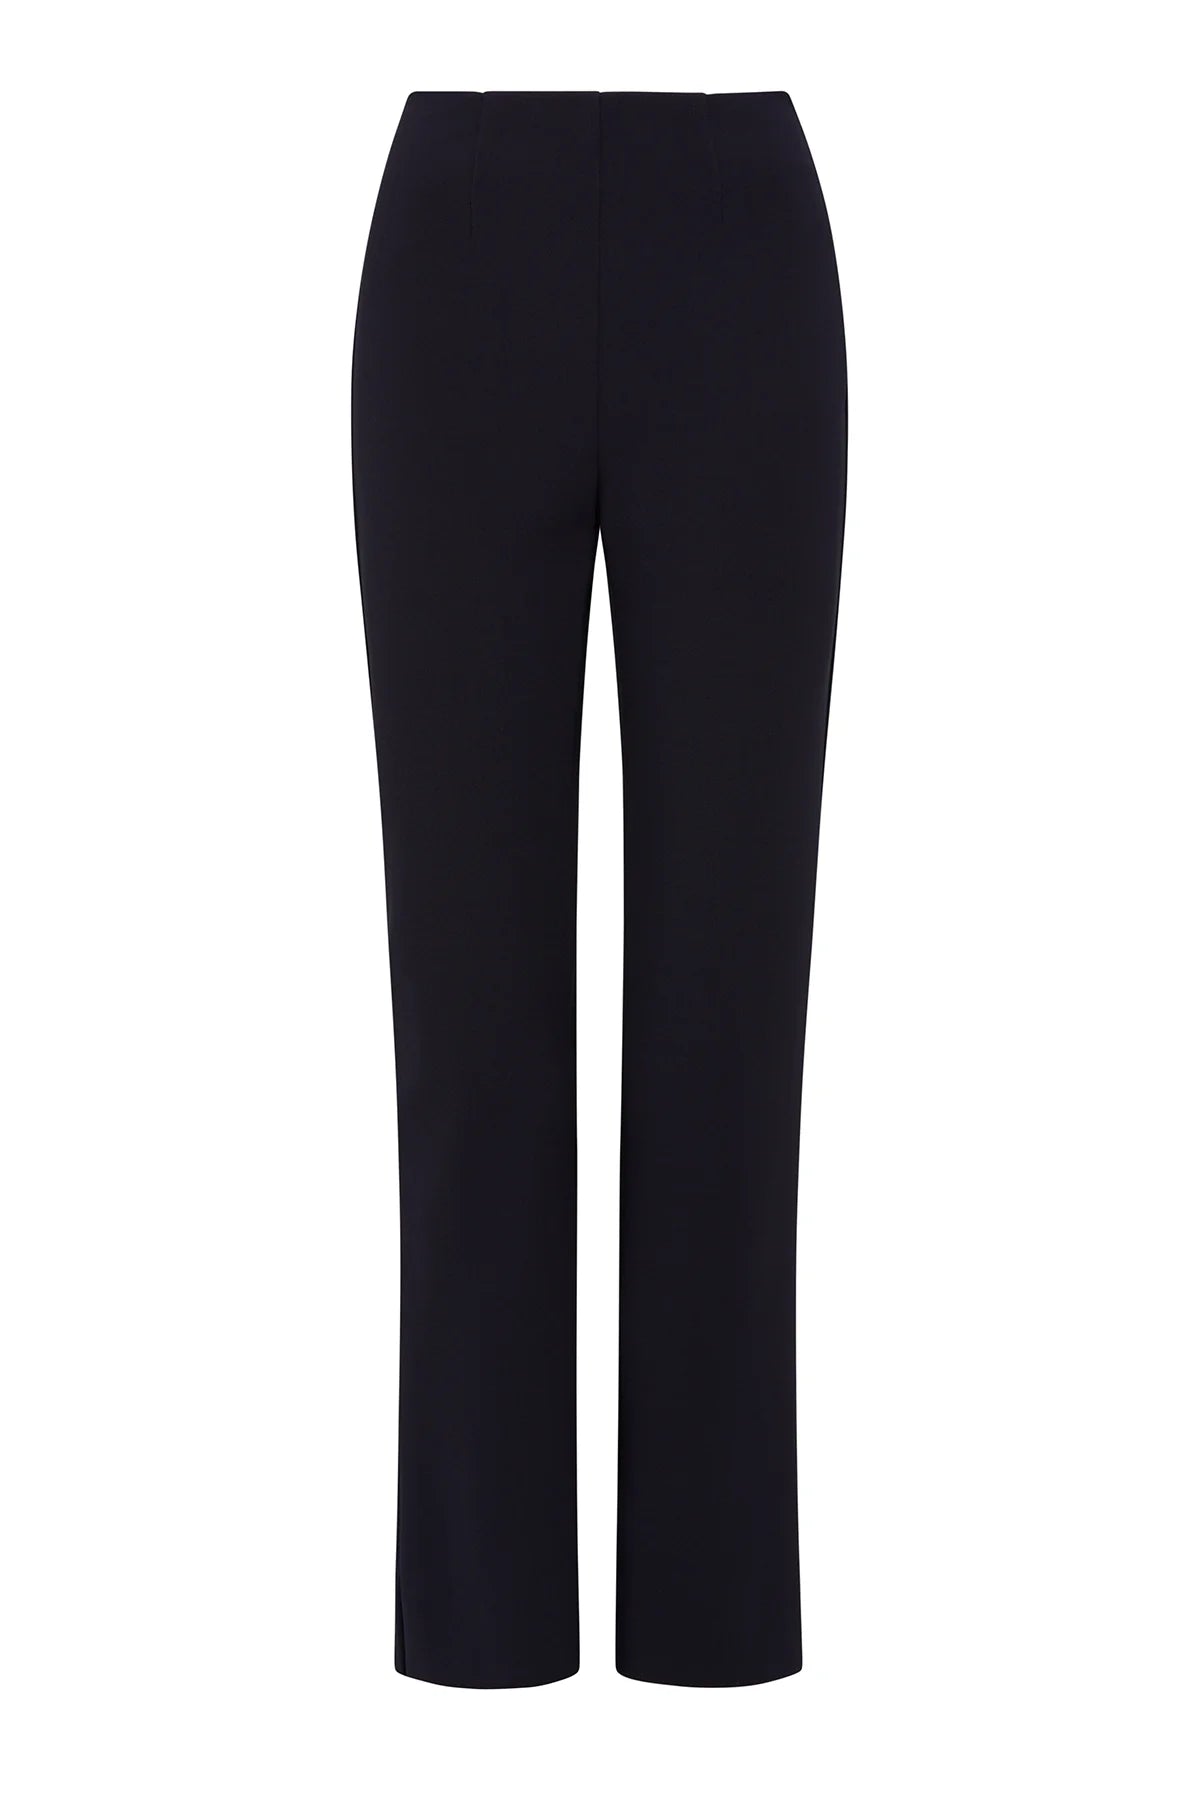 Cable - Dana Crepe Pant - Navy